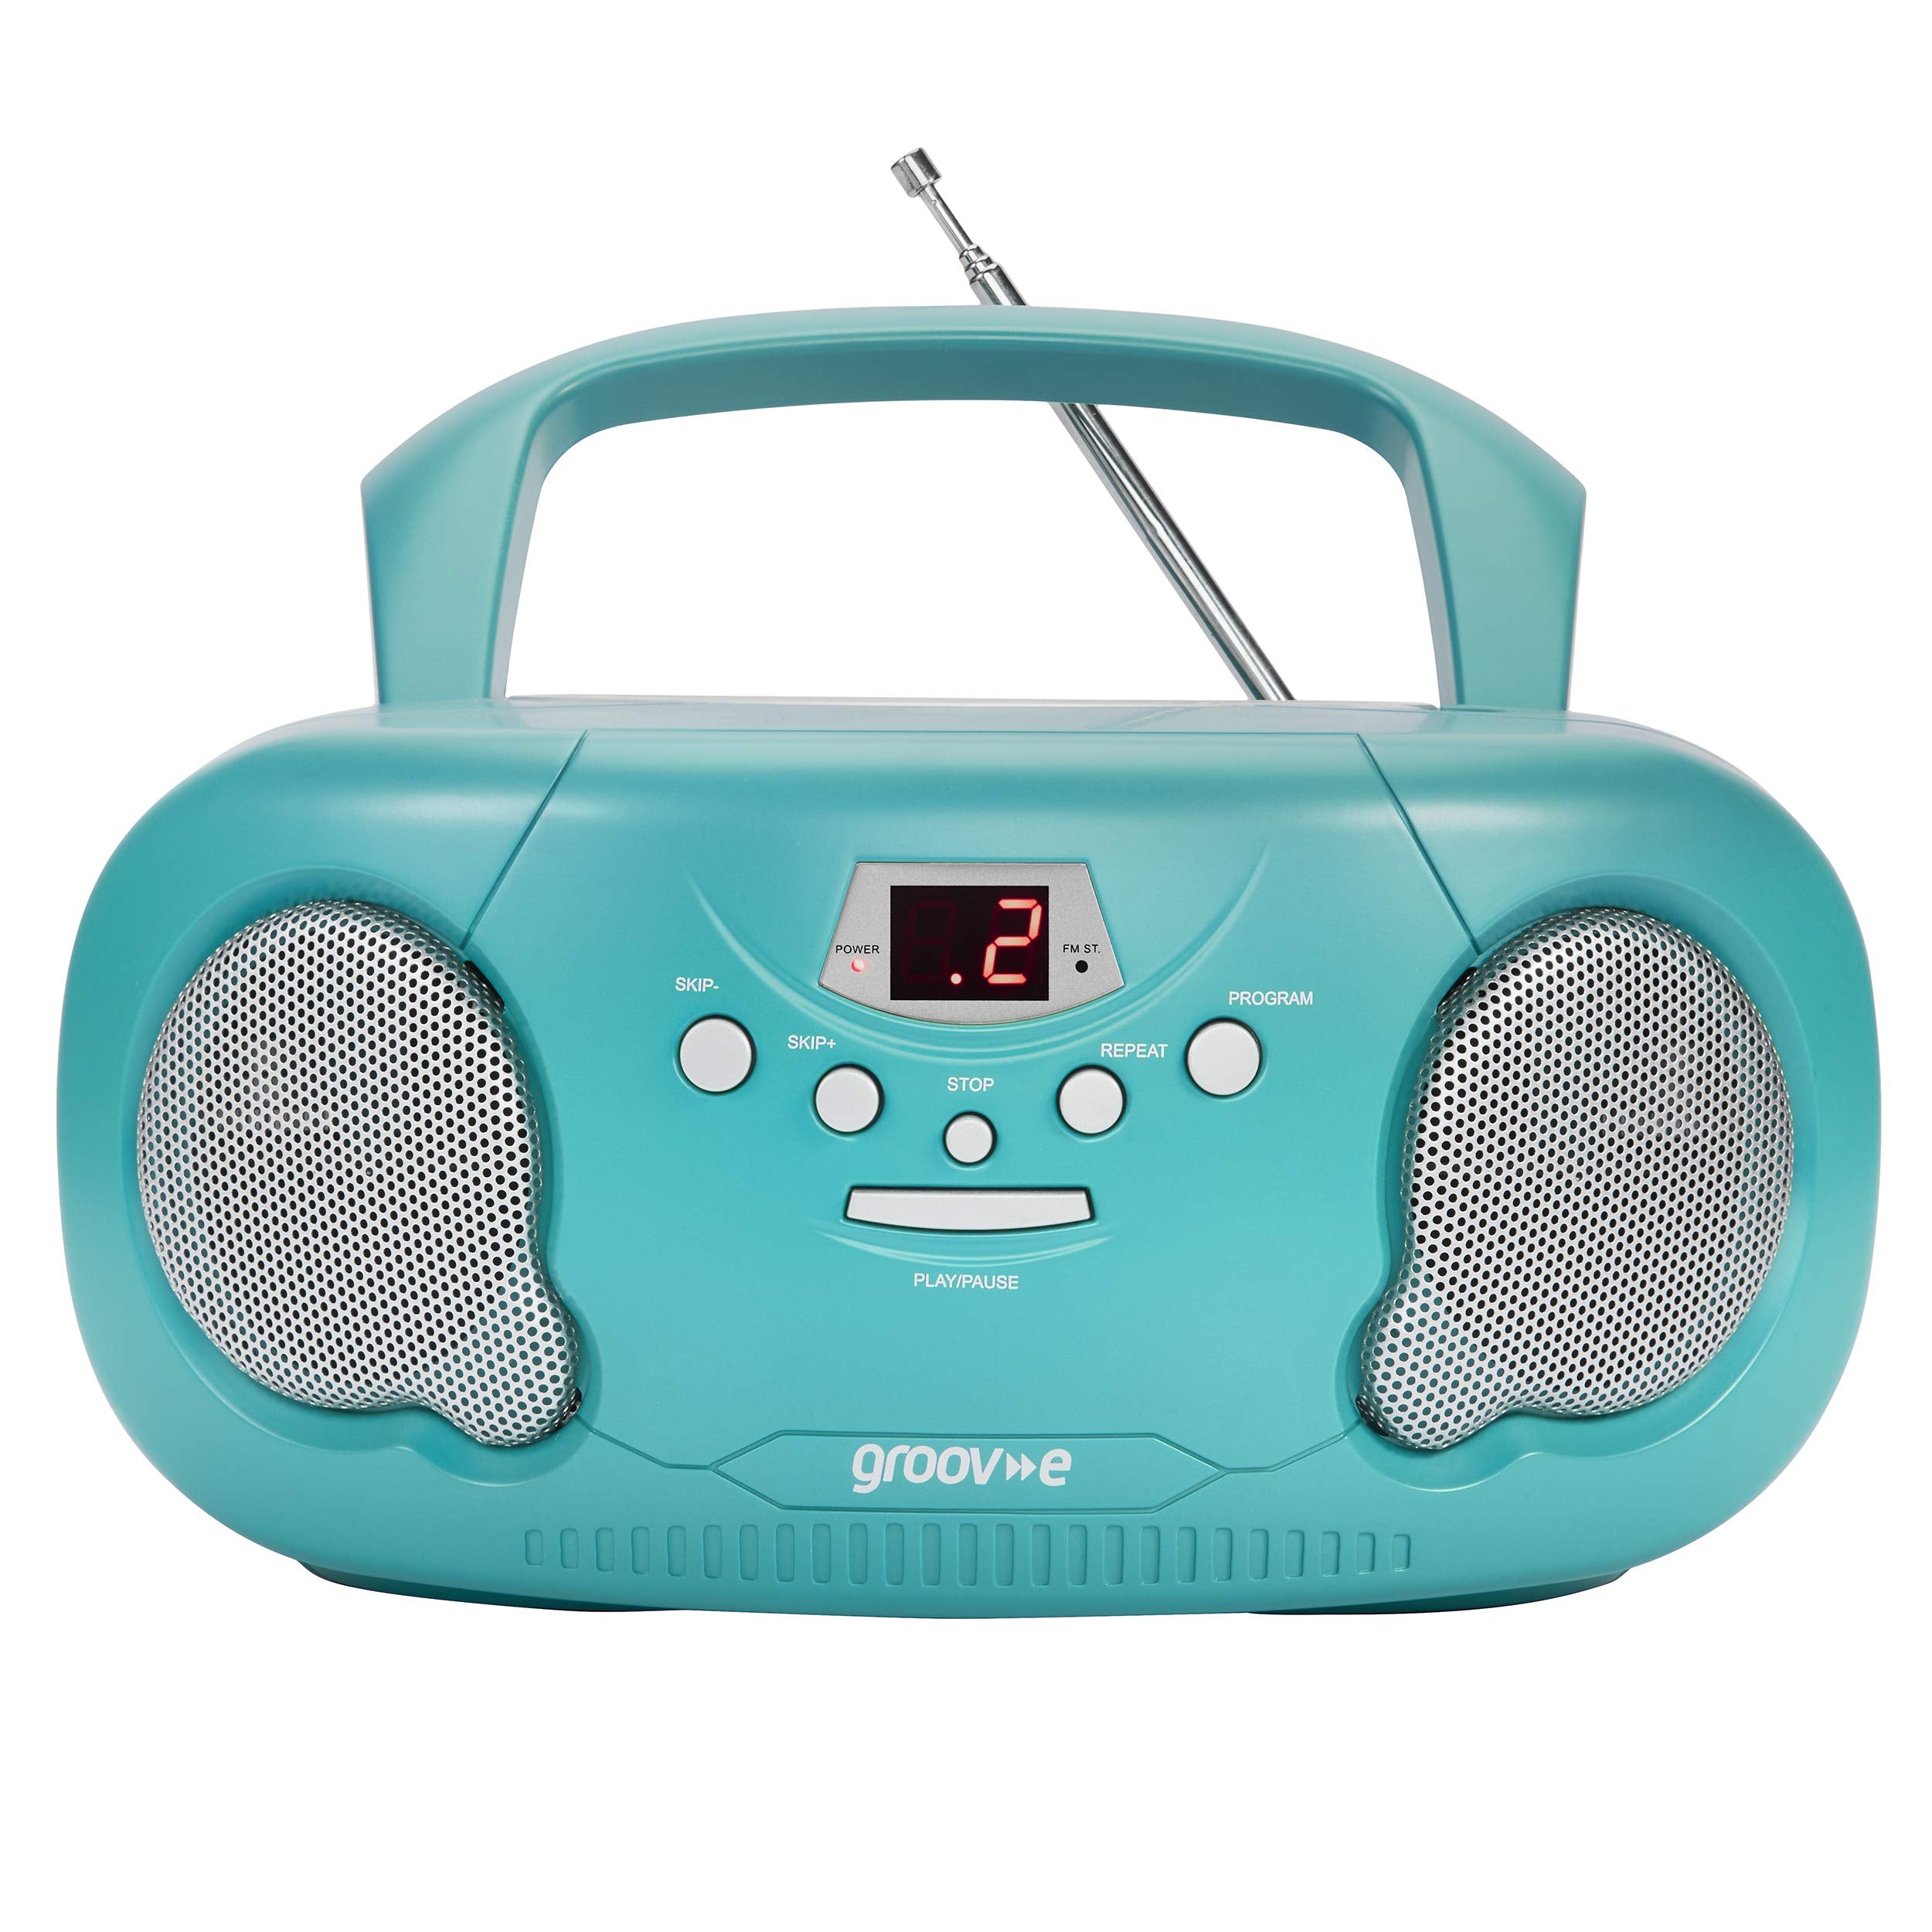 Groov-e GVPS733/TL Portable CD Player Boombox with AM/FM Radio, 3.5mm AUX Input, Headphone Jack, LED Display - Teal, 21.0 cm*23.0 cm*10.0 cm